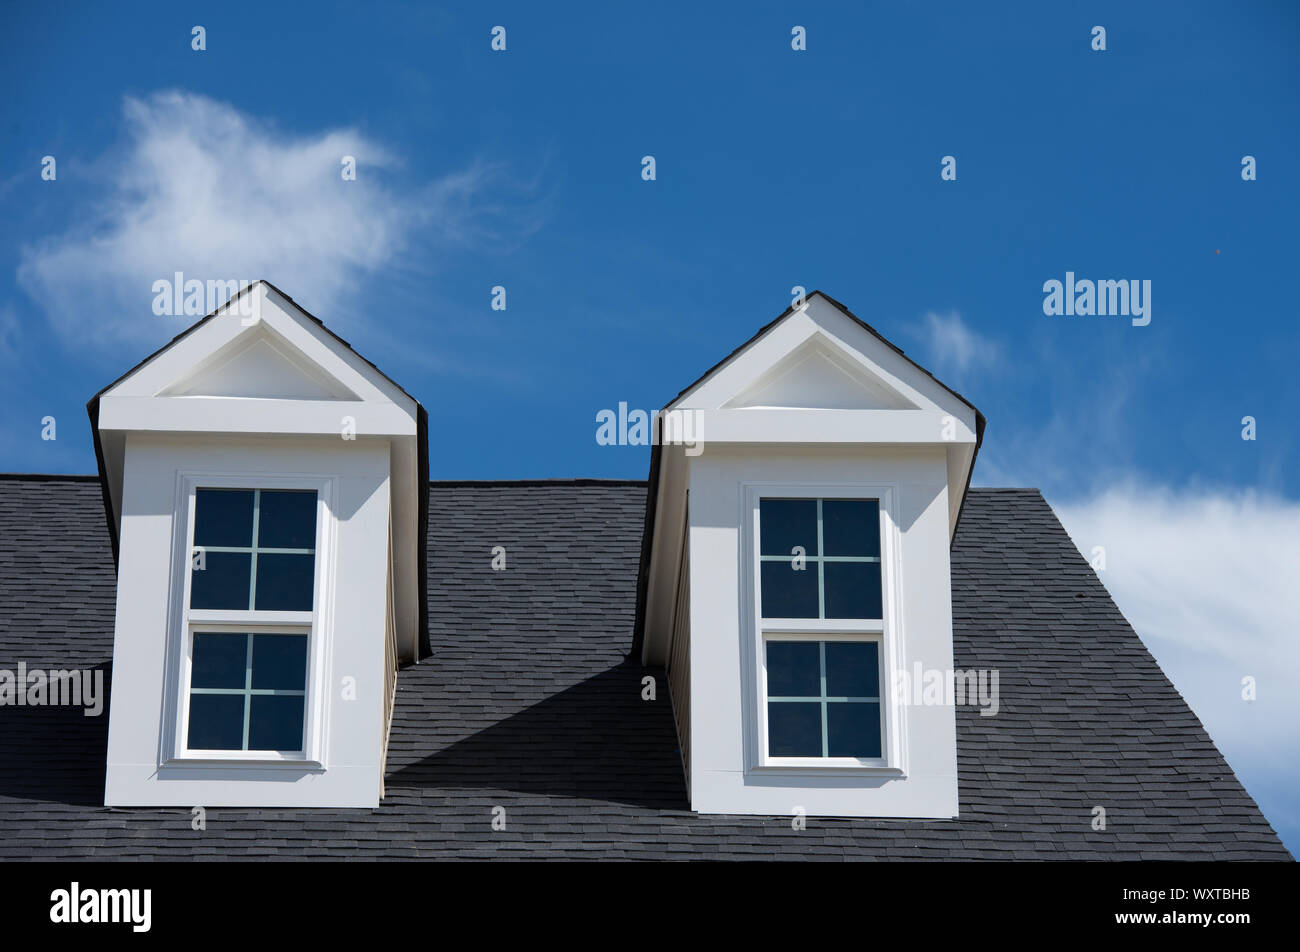 A dormer window with a gable roof blue cloudy sky background on a new construction single family home in the USA Stock Photo